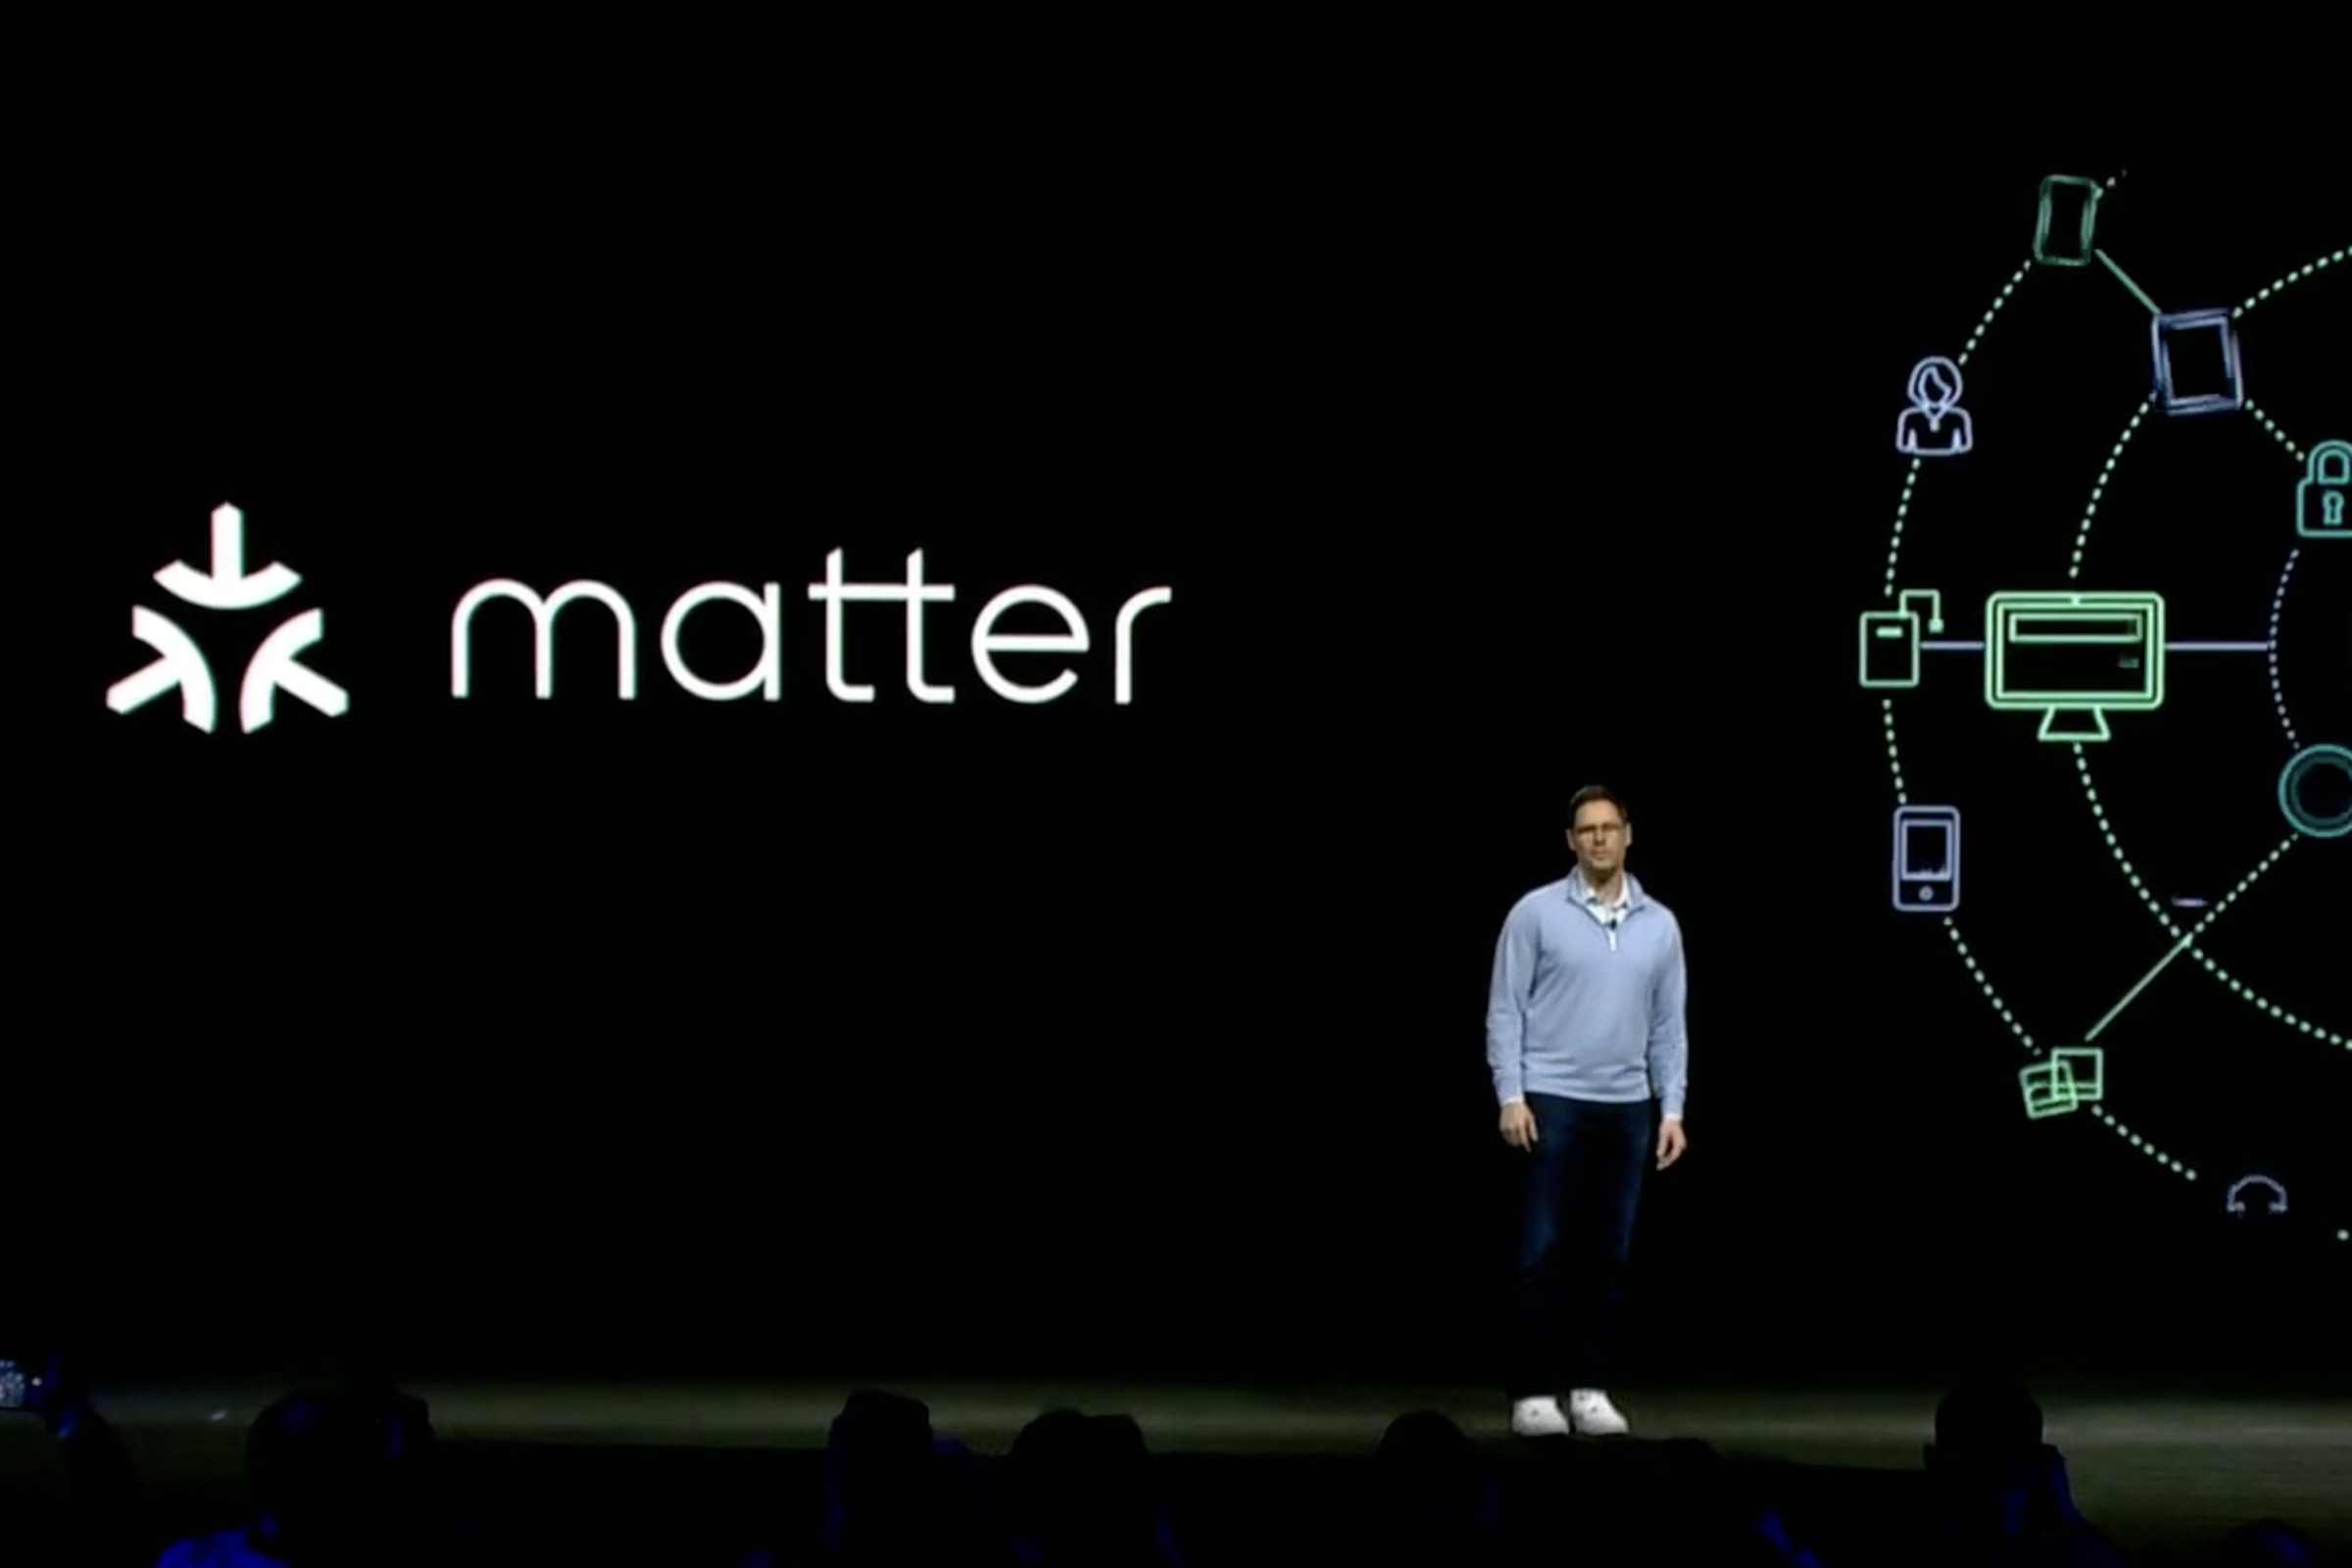 Samsung touted its plans for Matter compatibility in its pre-show keynote at CES 2022.